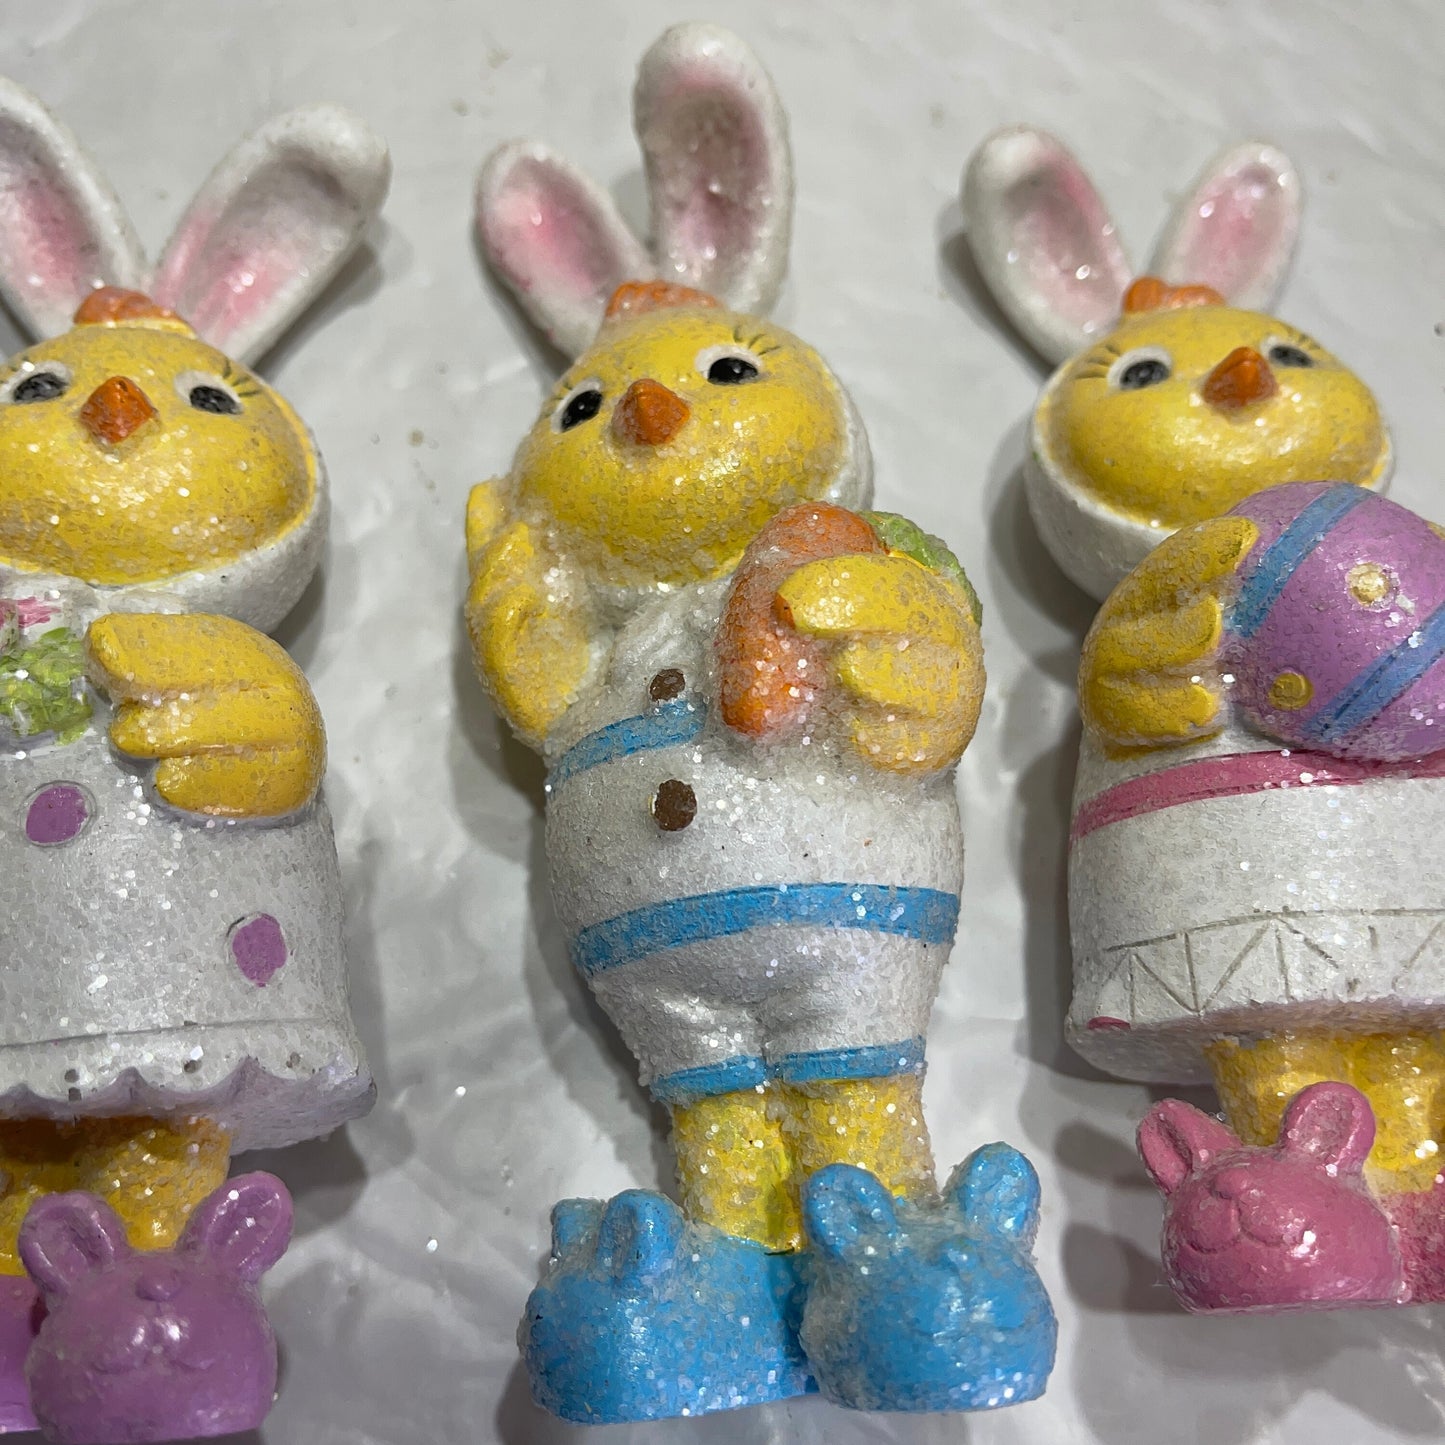 Spectacular Set Of 3 Sparkling Baby Chicks In Bunny Pajamas and Slippers Ready For The Easter Bunny To Visit Vintage Collectible Figurines